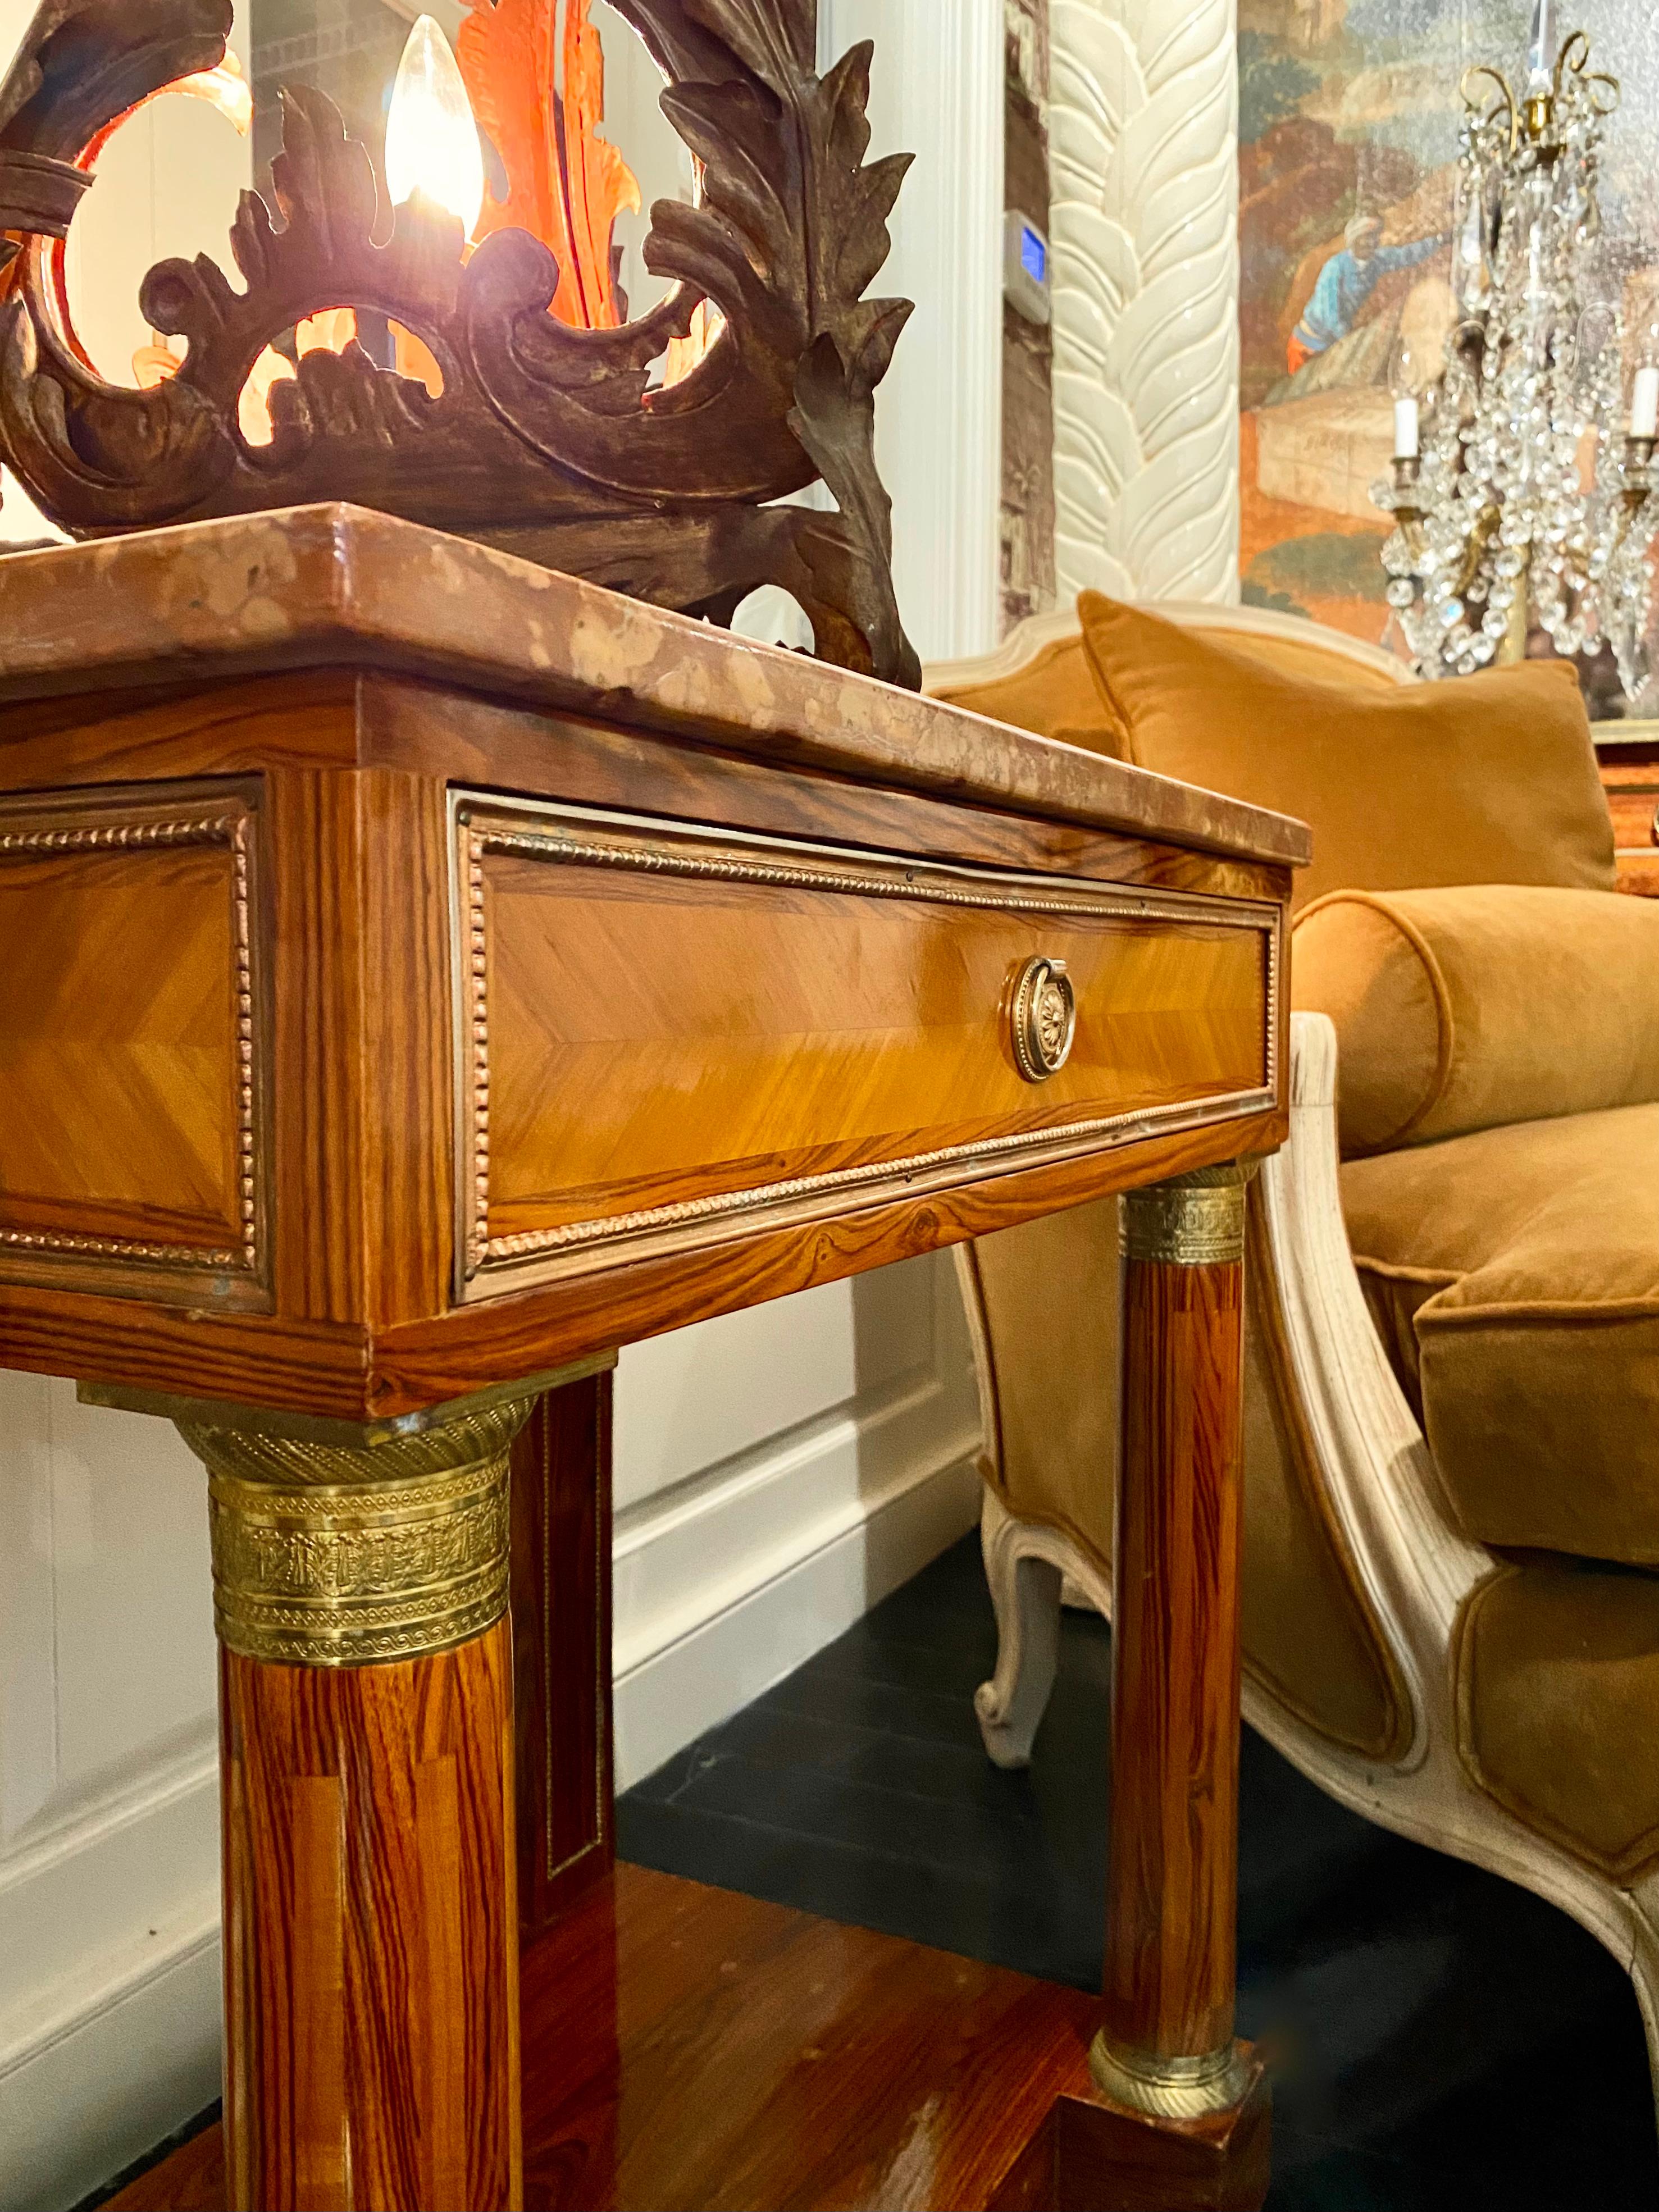 Empire style marble-top nightstand or console. One drawer and lower ledge, gilt bronze details and neoclassical columns.